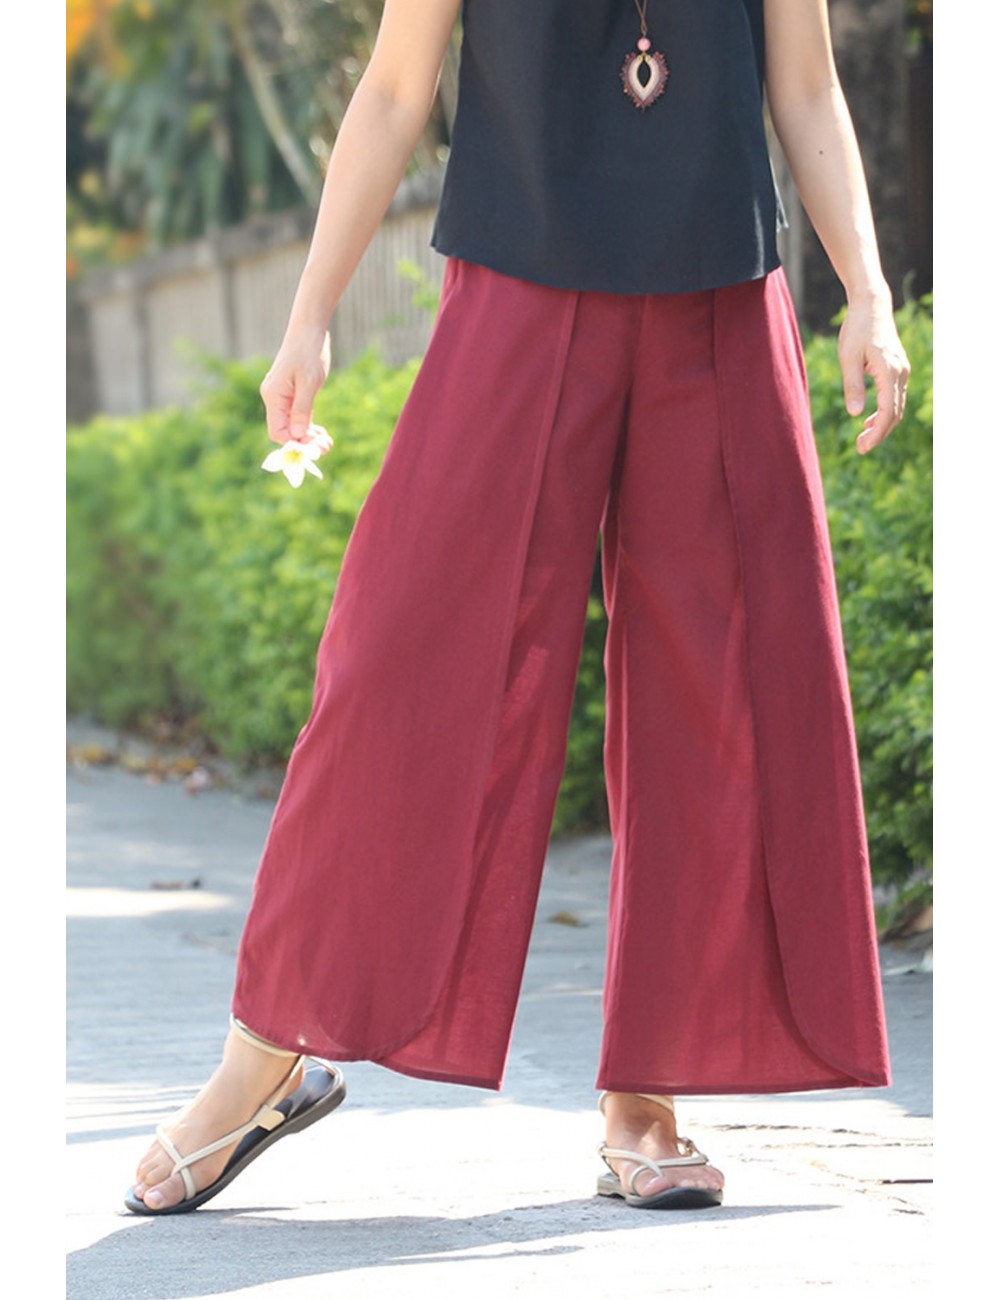 Elley | Women Cotton Trousers | Maroon & Navy Blue Trousers 3XL-40/42 |  Cotton Solid Regular Fit Pants | Women Formal/Casual Wear Trousers (Pack of  2) : Amazon.in: Fashion